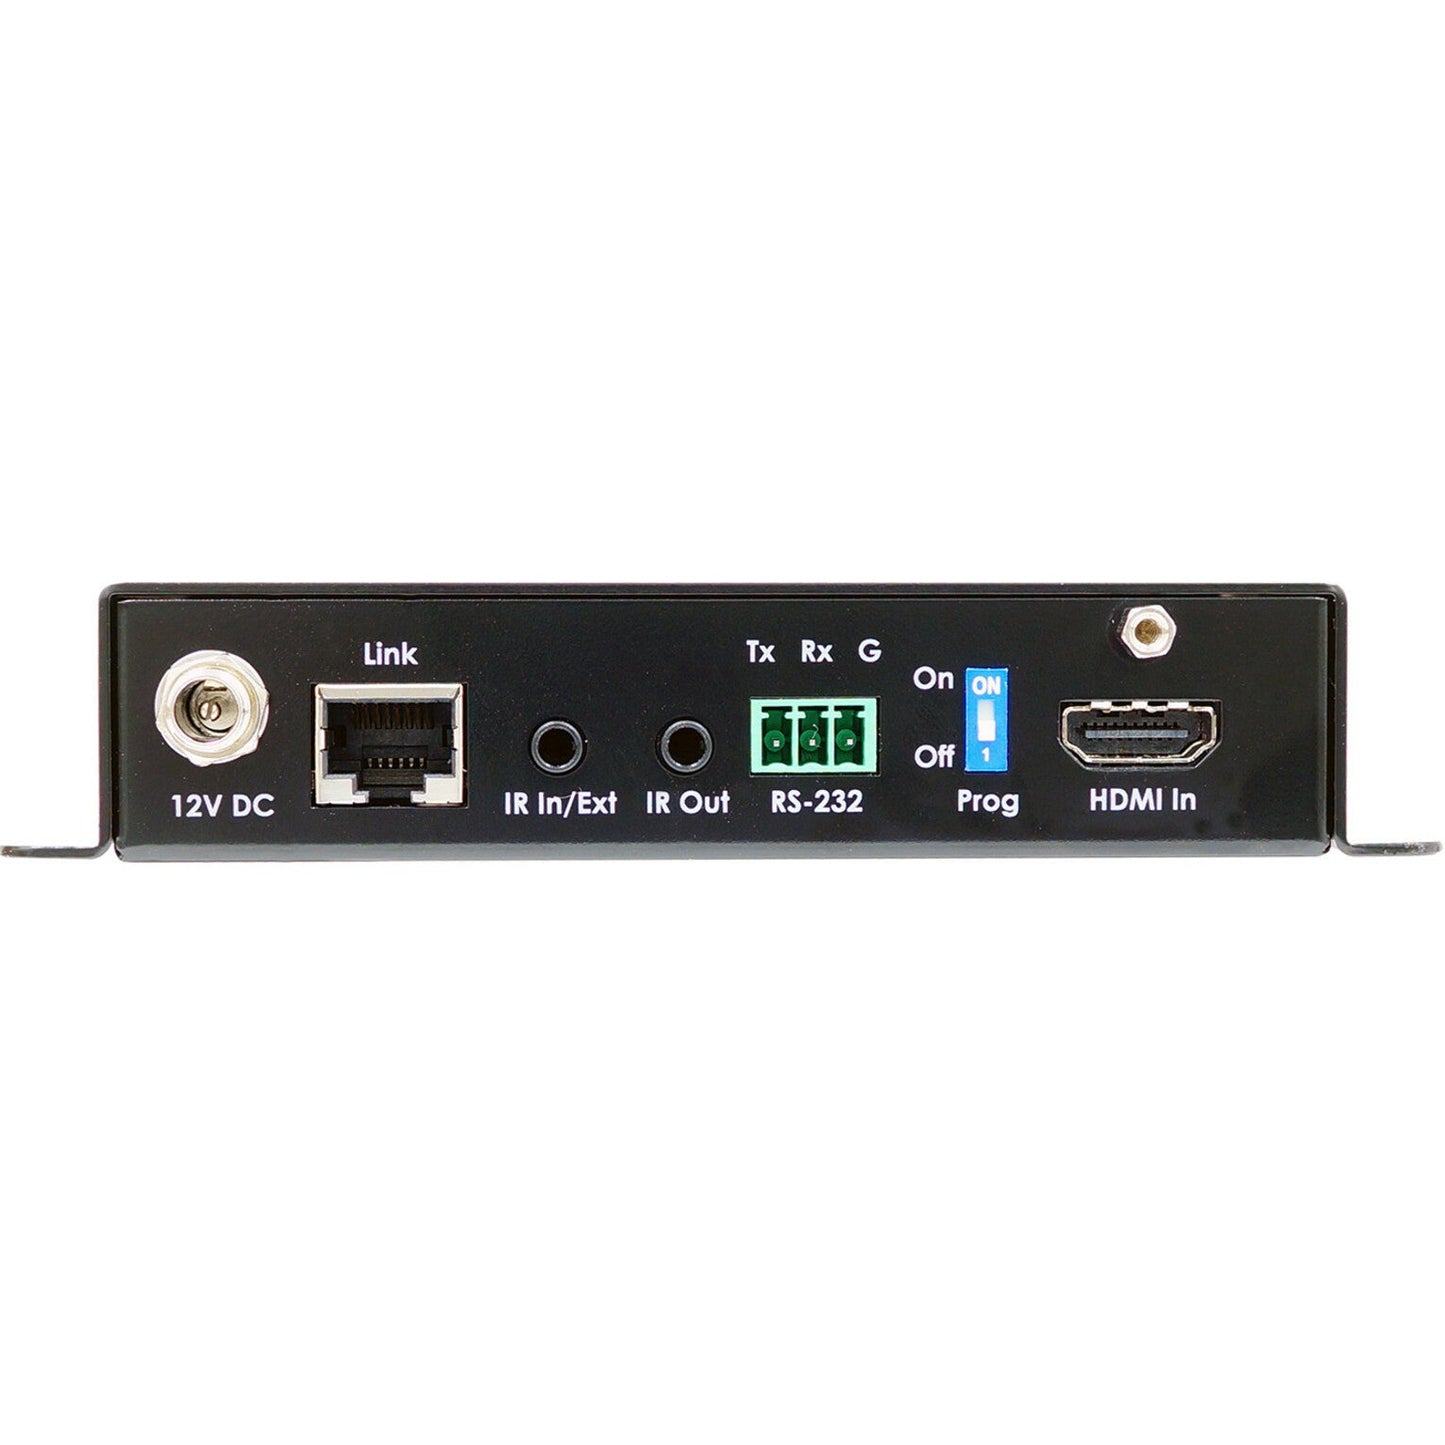 Gefen 4K Ultra HD 600 MHz HDBaseT Extender w/ HDR RS-232 2-way IR and POL